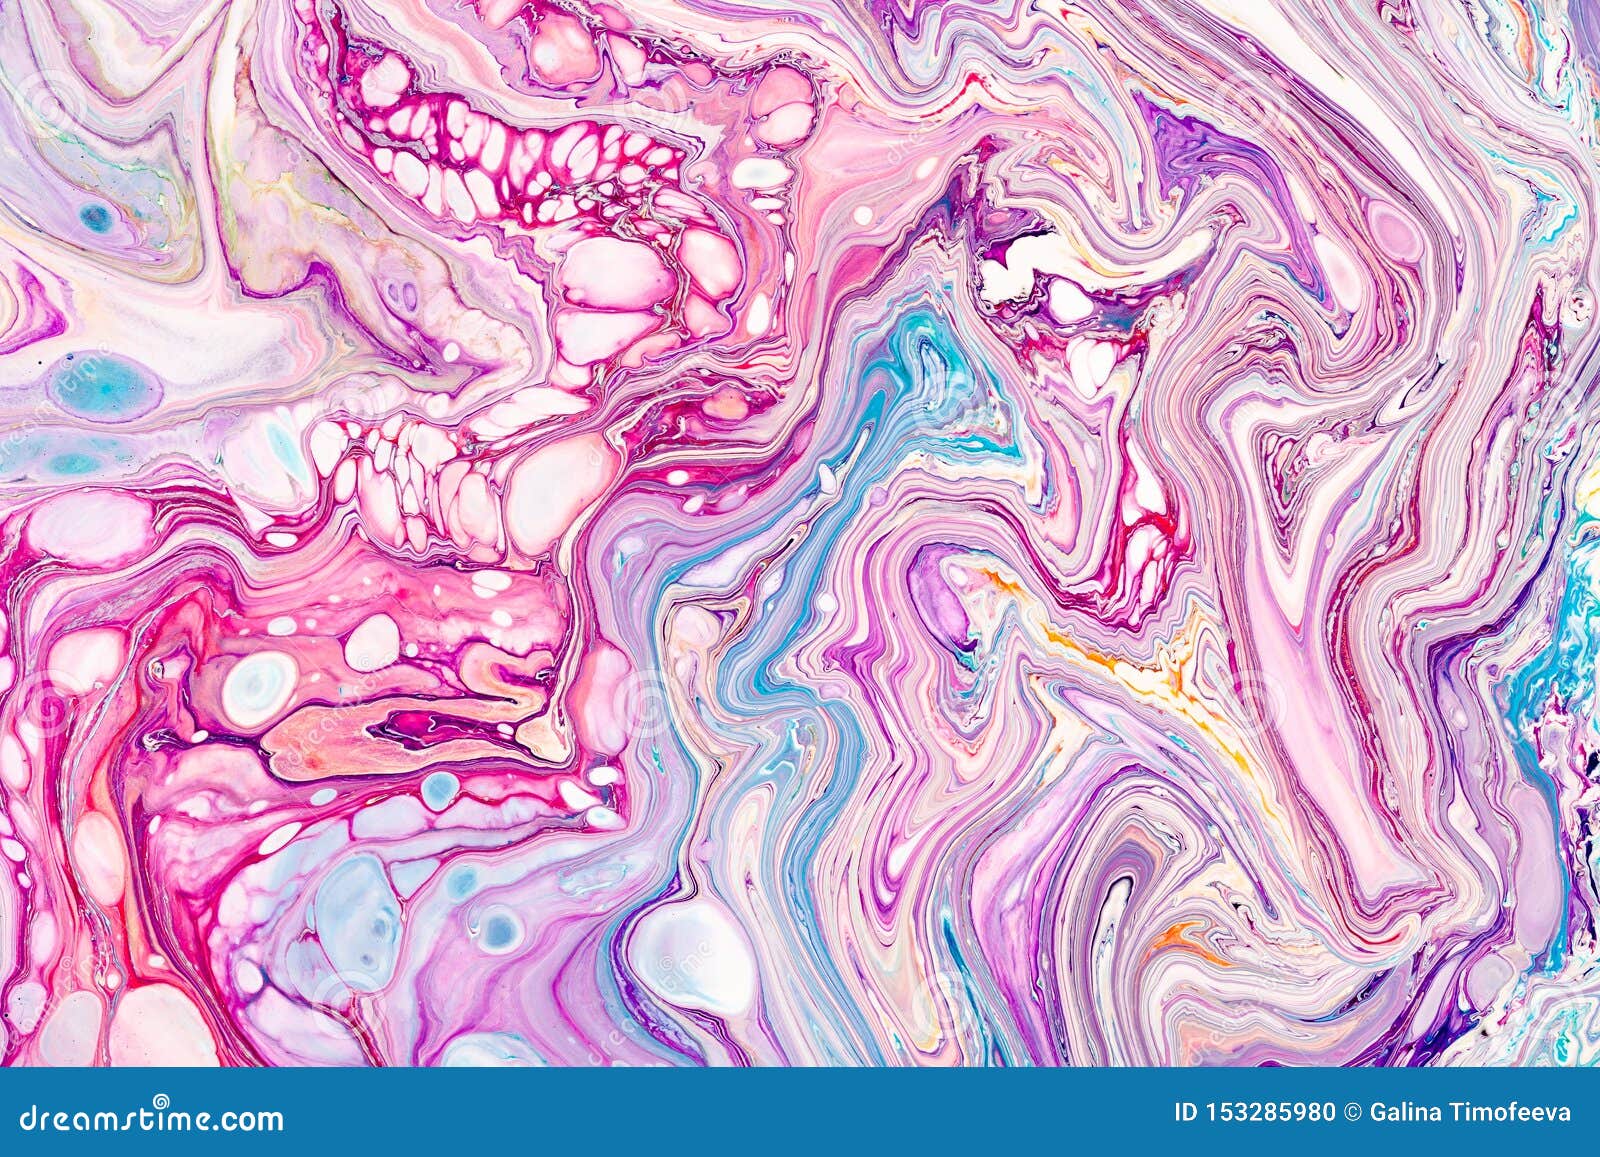 Oil Paint Mix Abstract Background. Rainbow Marble Texture. Acrylic Liquid  Flow Colorful Wallpaper Stock Photo - Image of effect, graphic: 153285980